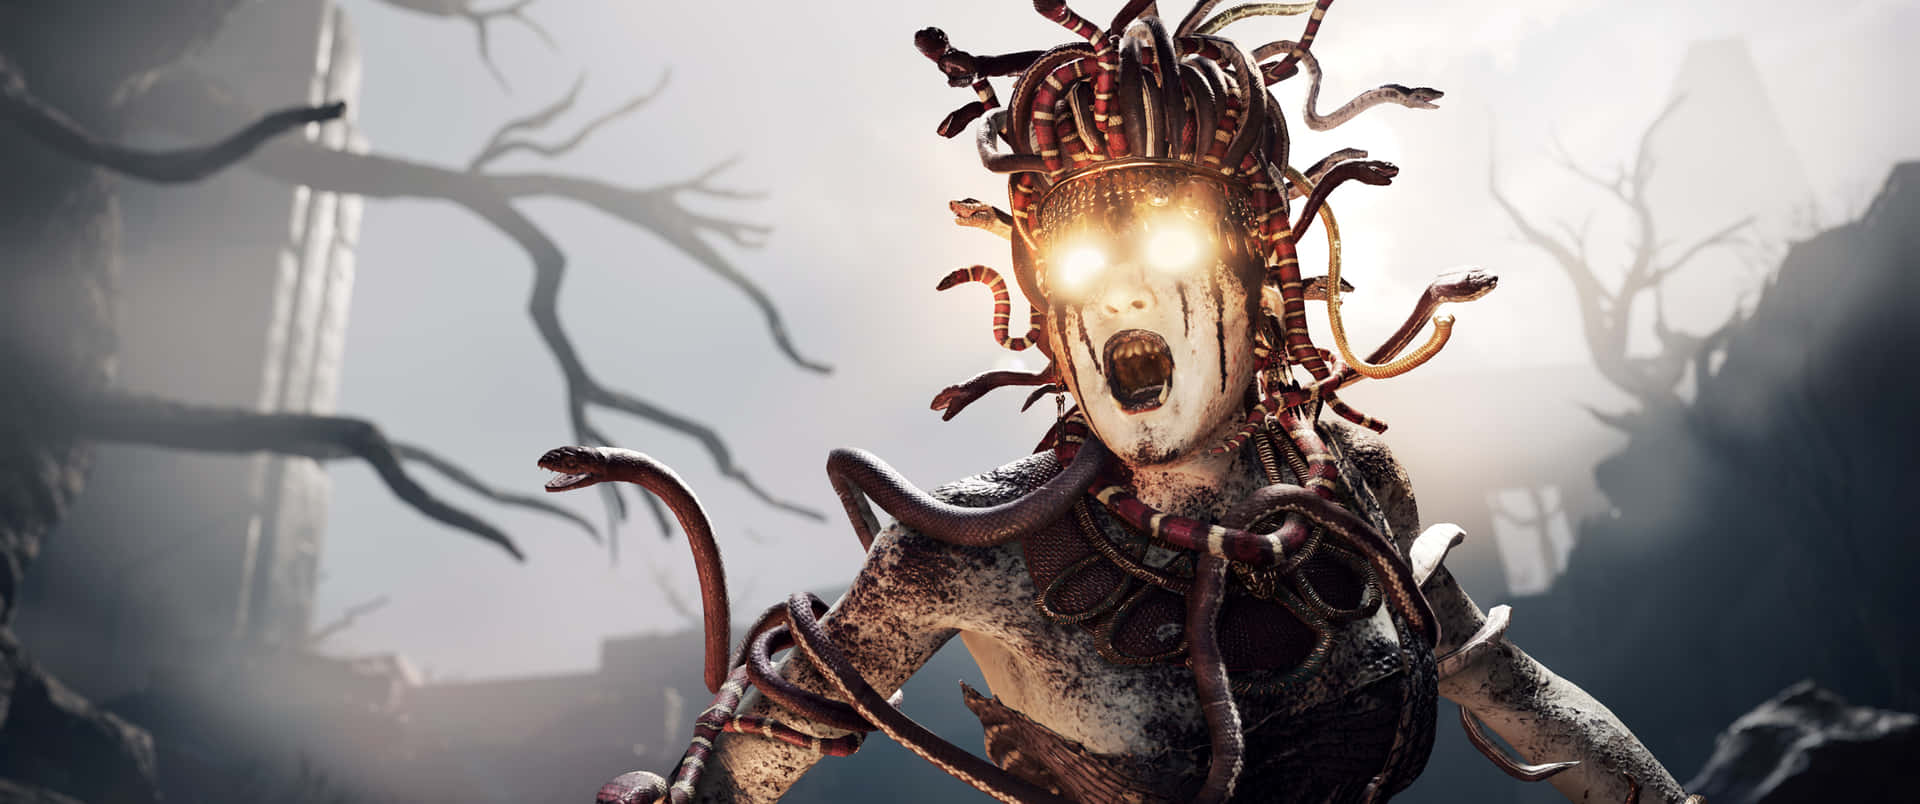 3440x1440p Assassin's Creed Odyssey Background Angry Medusa Background